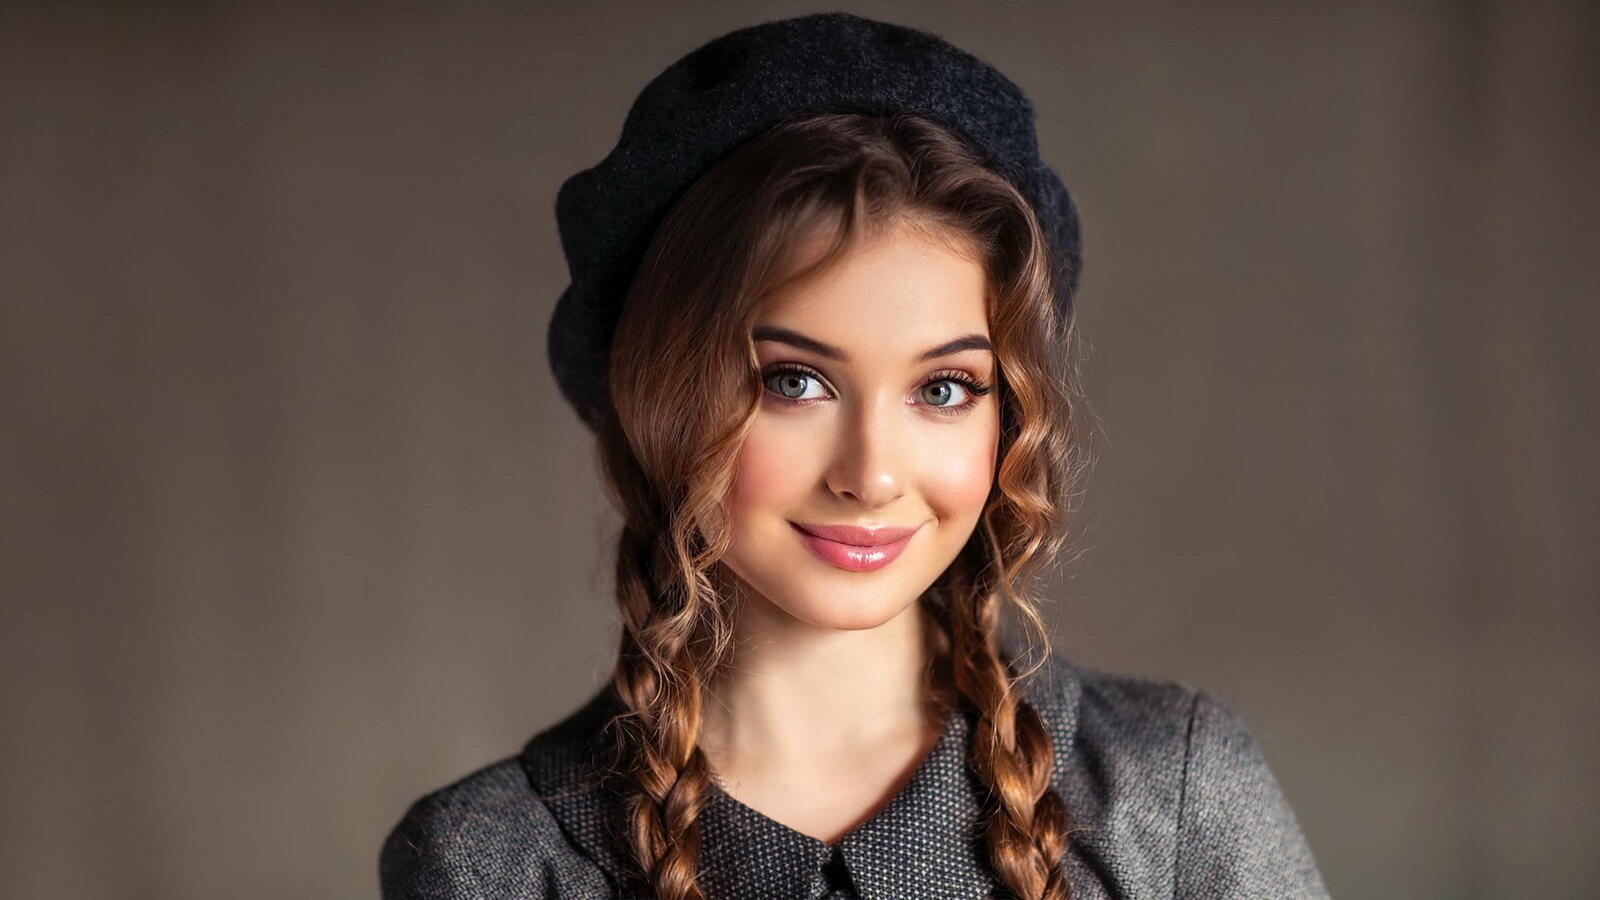 Free photo A girl in a beret smiling against a gray background